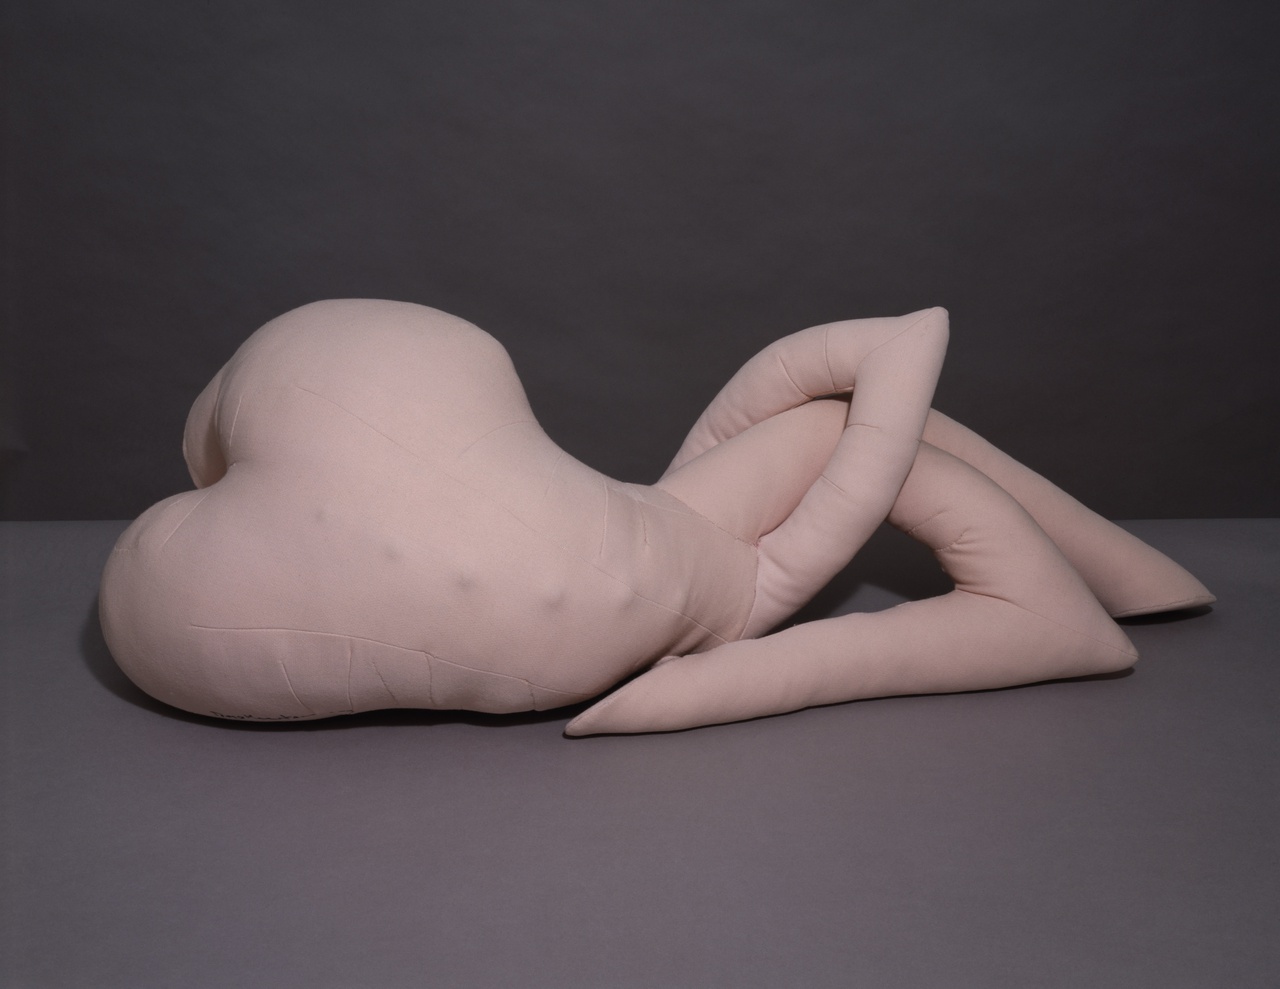 10/33 - Dorothea Tanning, Nue couchée ,1969-70. Foto: Tate